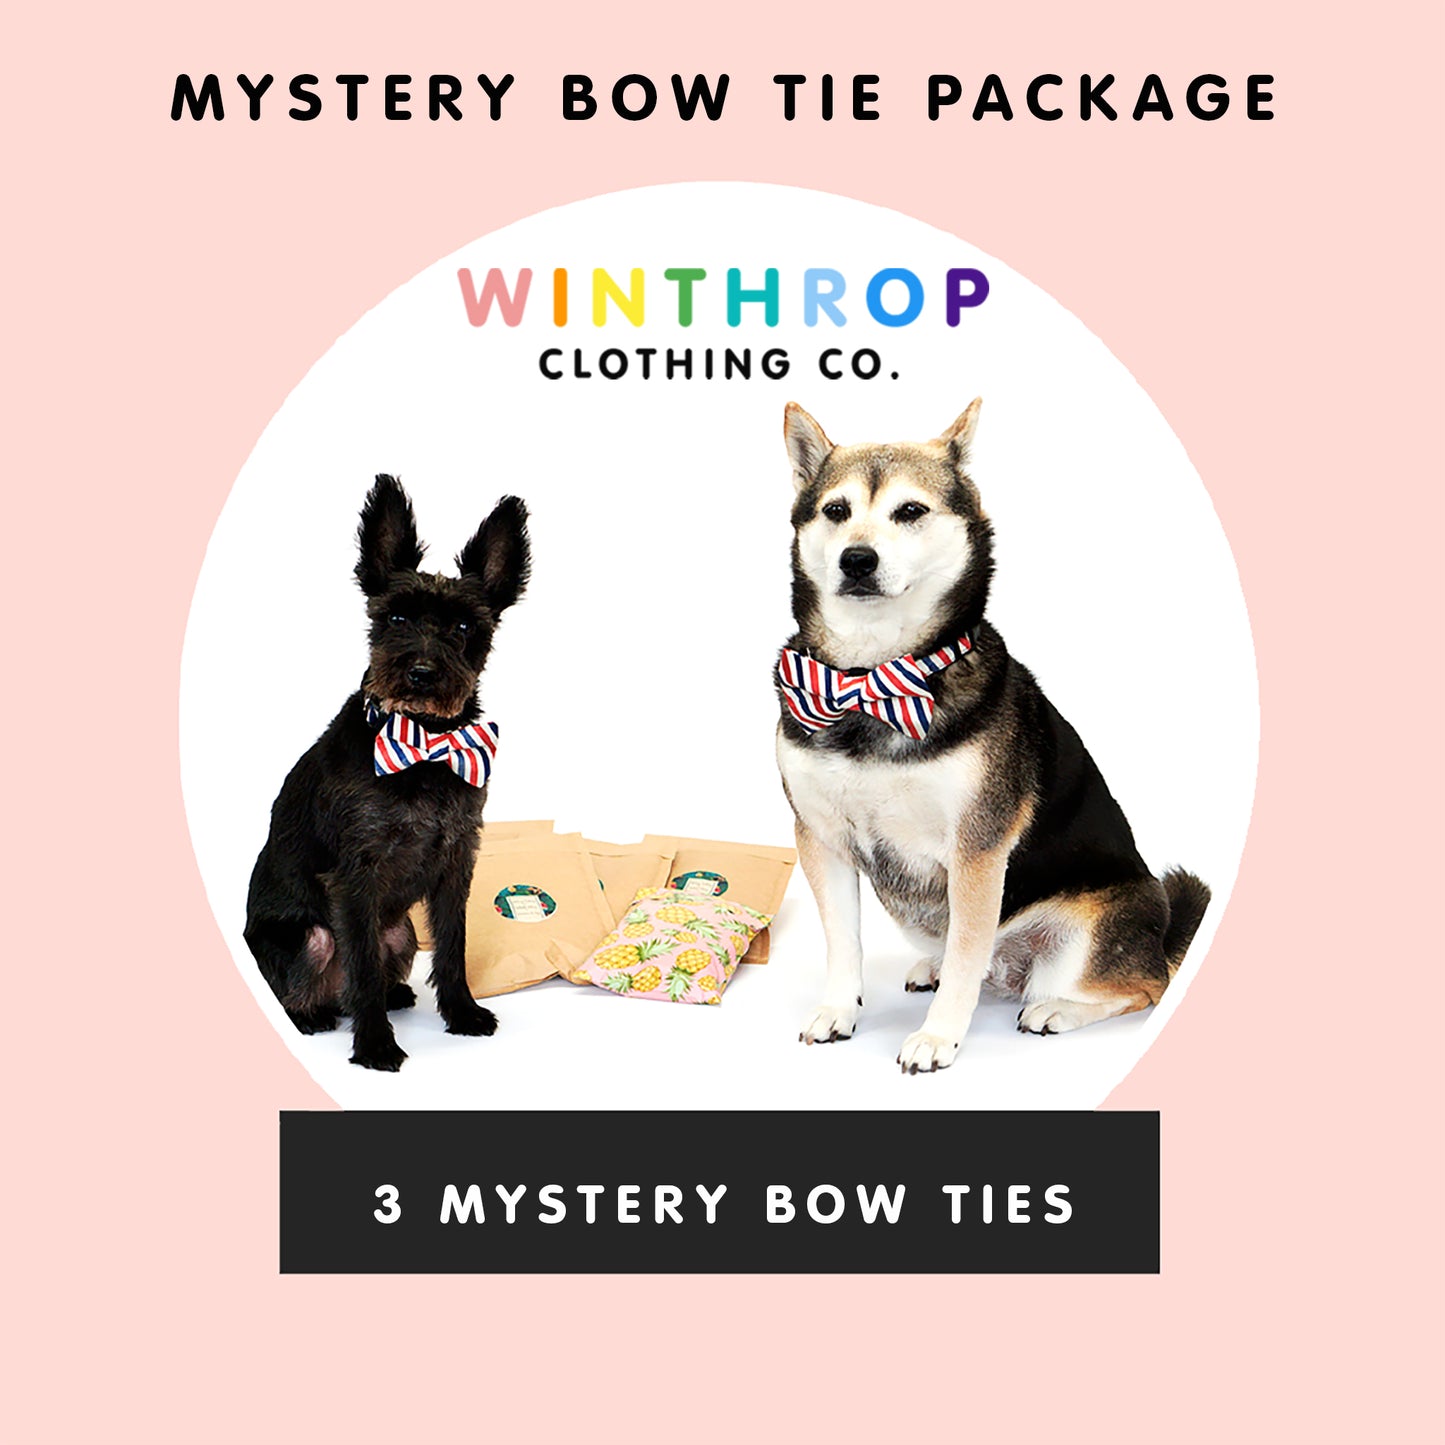 mystery bow tie package